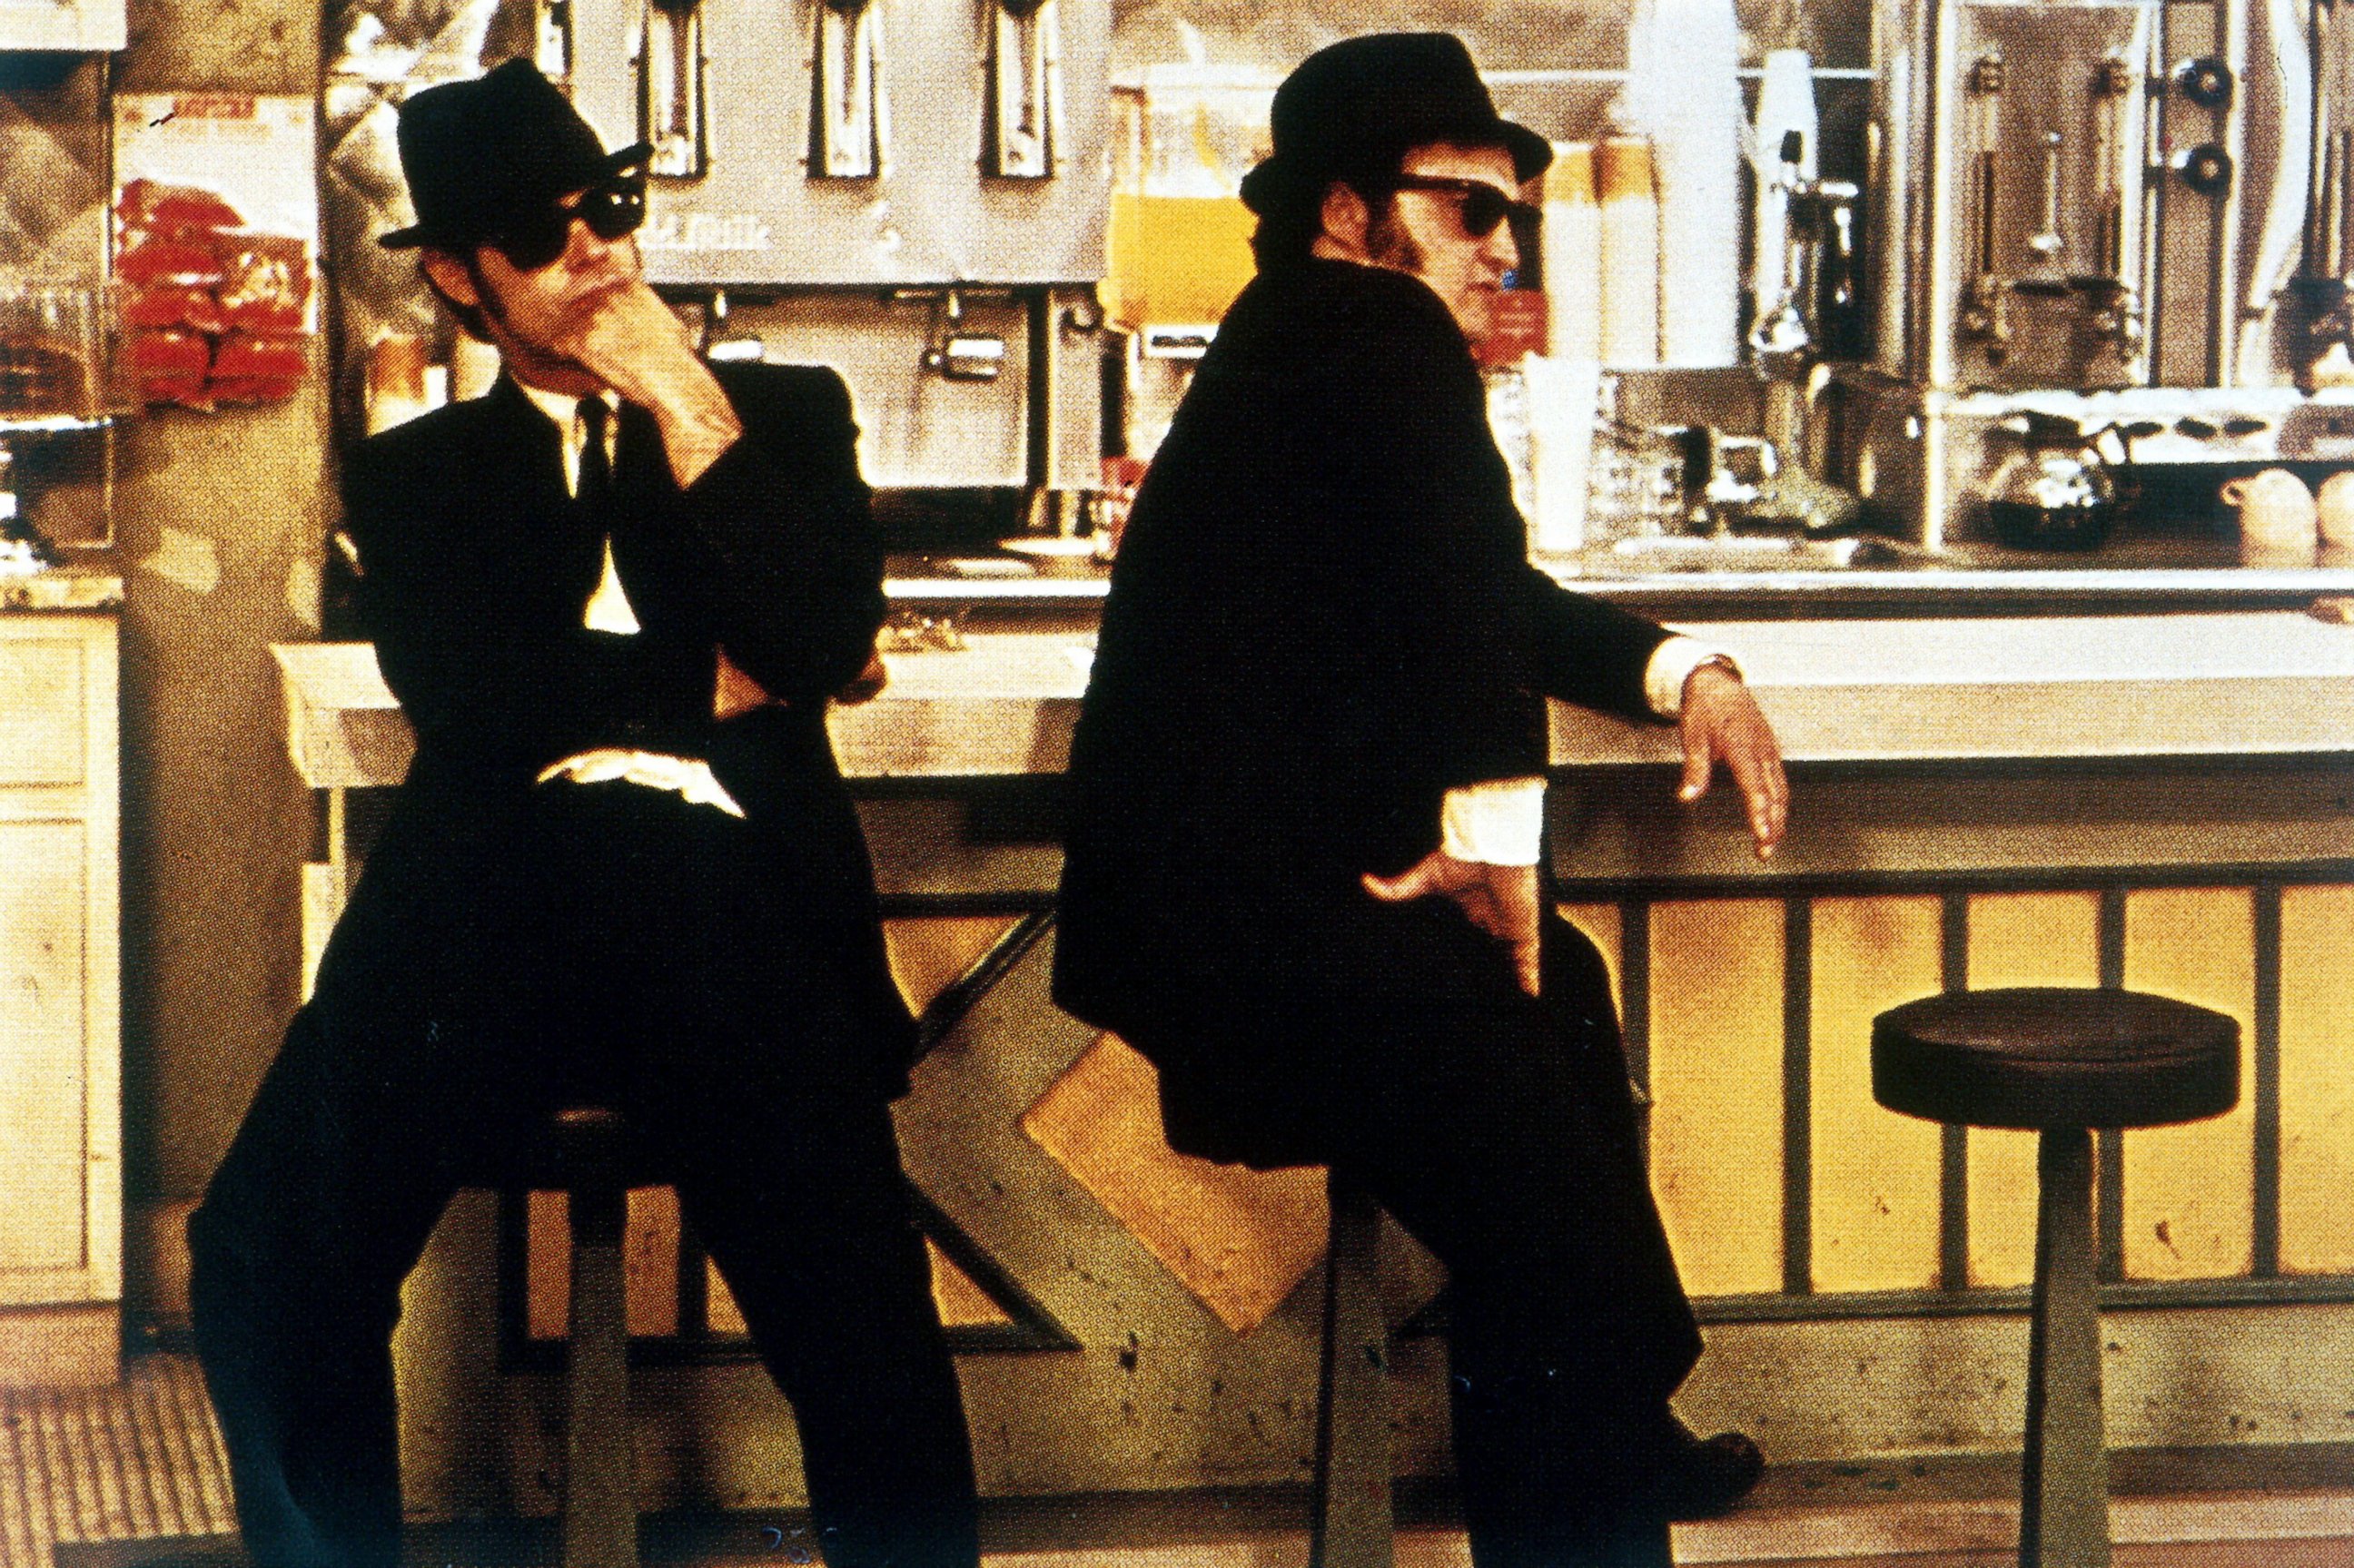 PHOTO: Dan Aykroyd, left, and John Belushi in a scene from the movie, "The Blues Brothers."